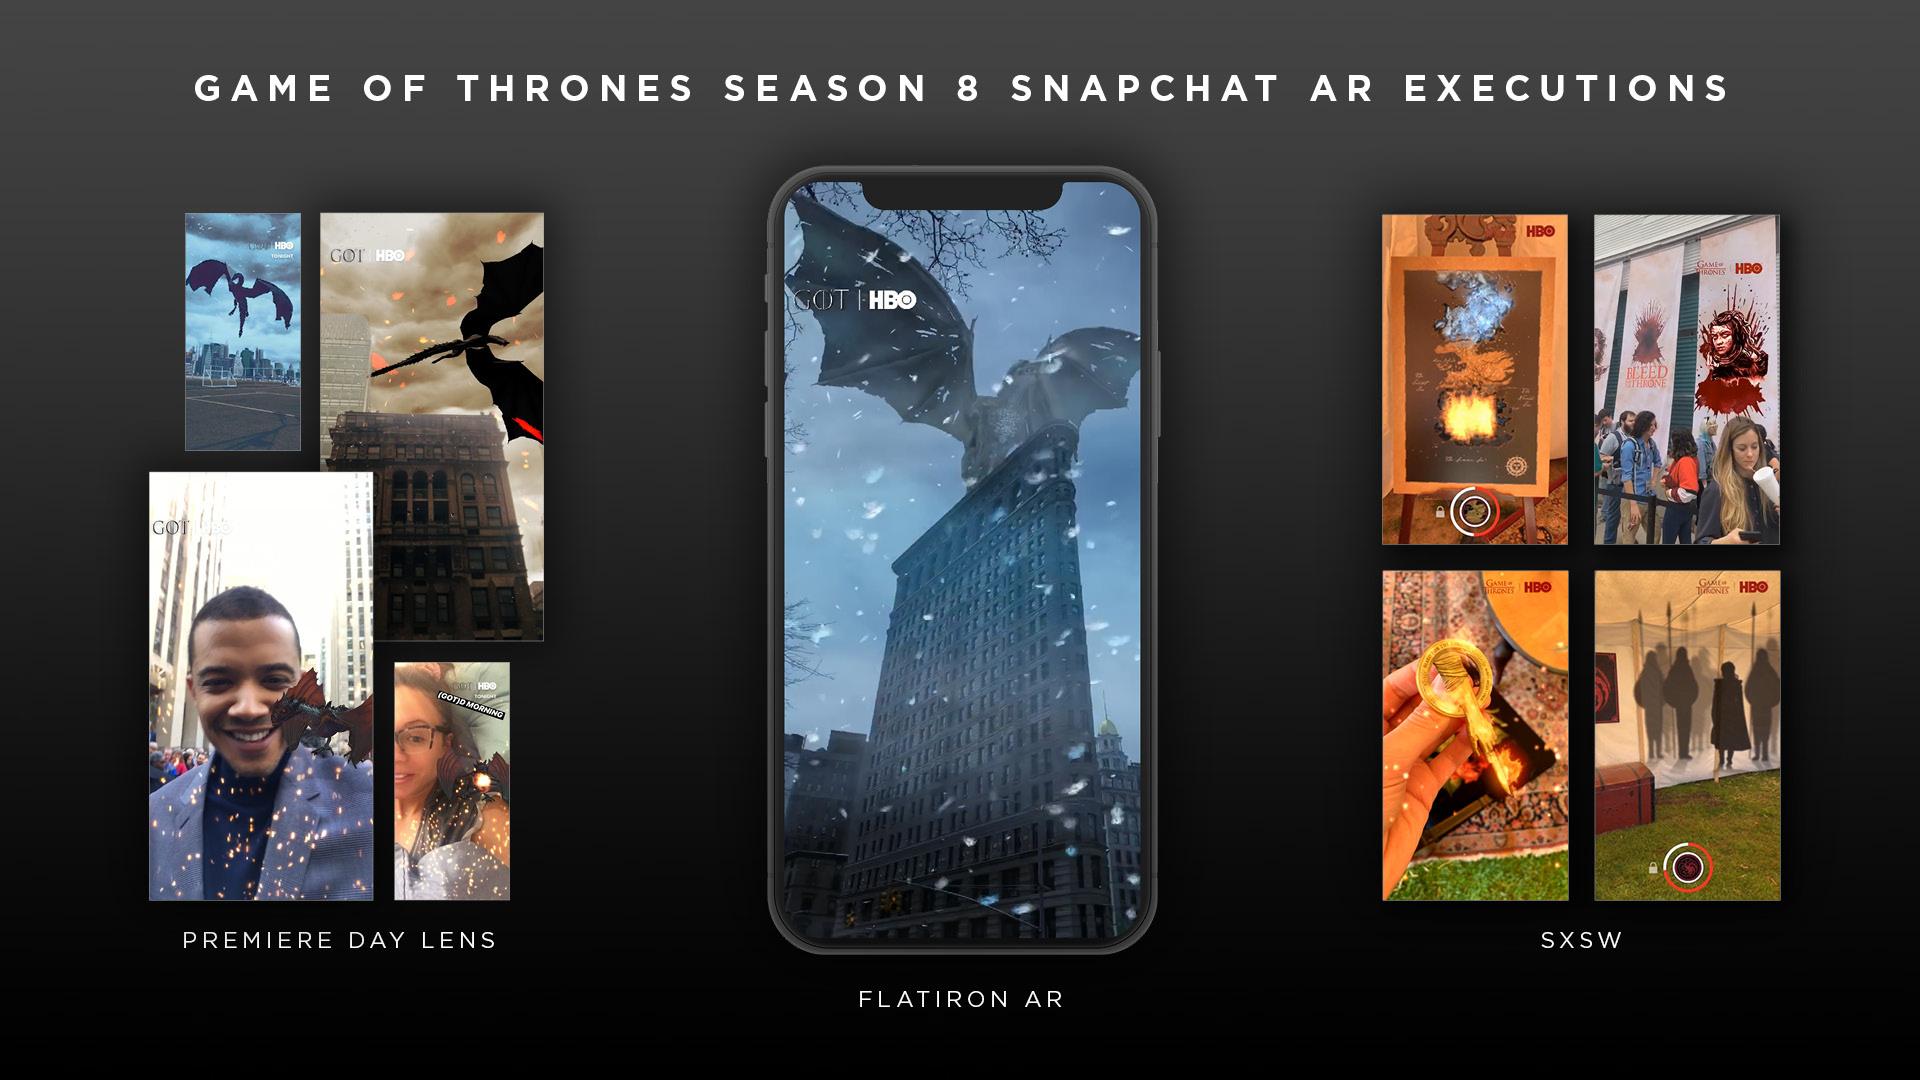 Seattle Software Developers | Snapchat and HBO Bring Game of Thrones to Life at SXSW | Snapchat HBO